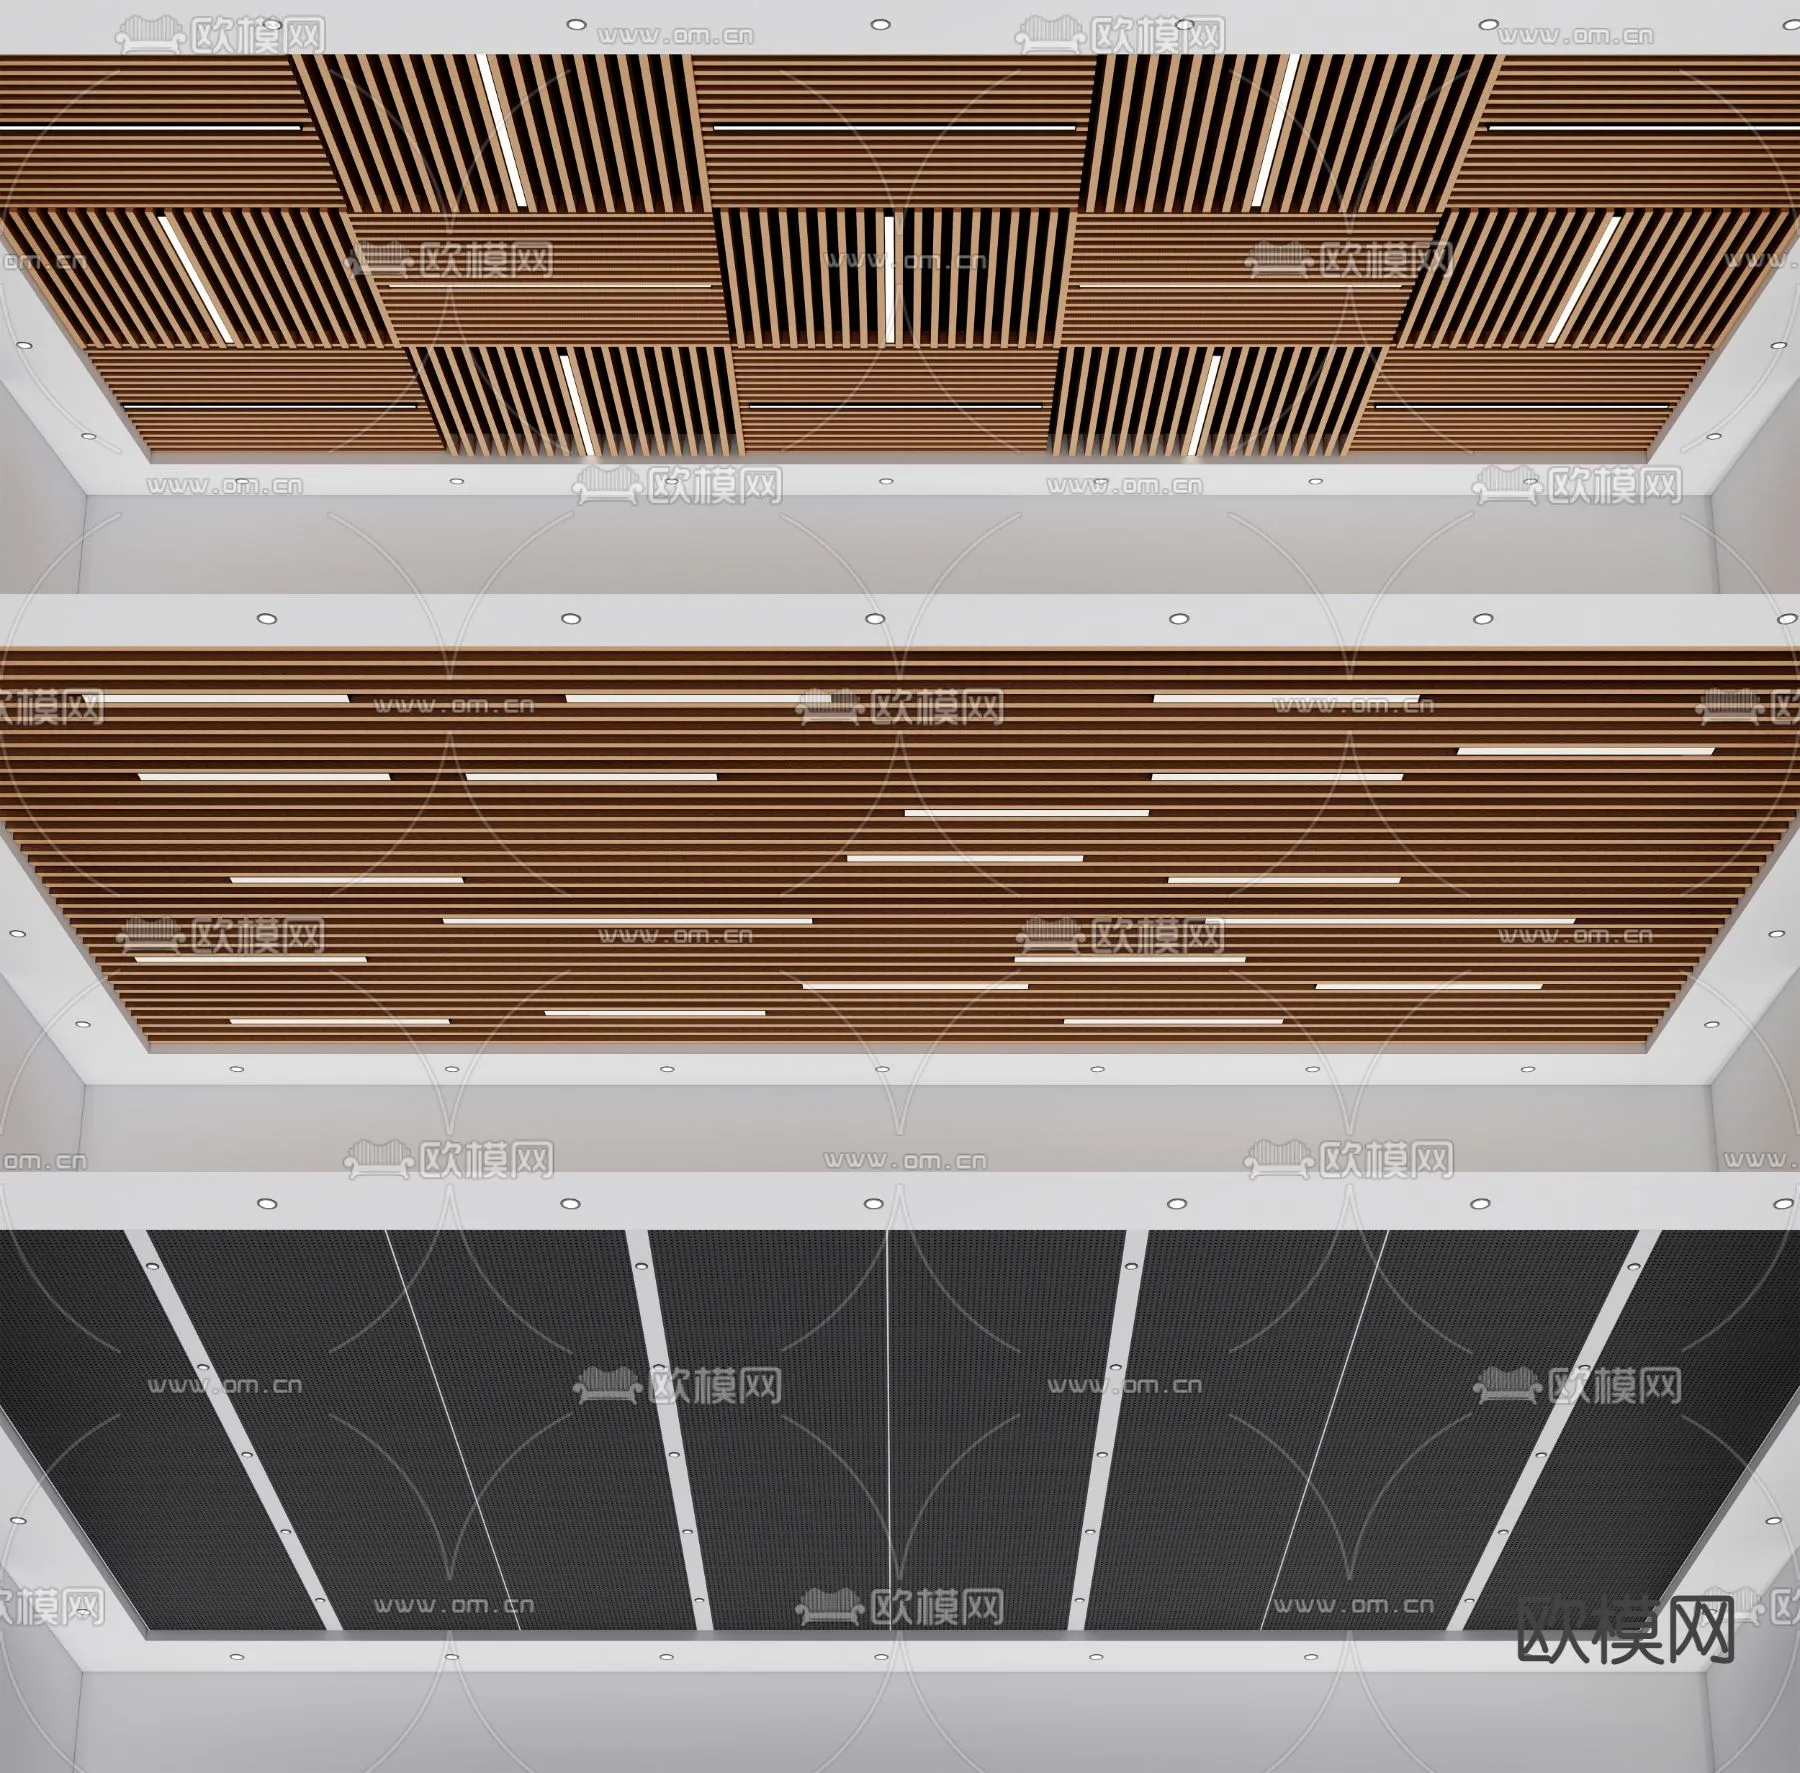 3DS MAX – DETAIL – CEILING – VRAY / CORONA – 3D MODEL – 3139